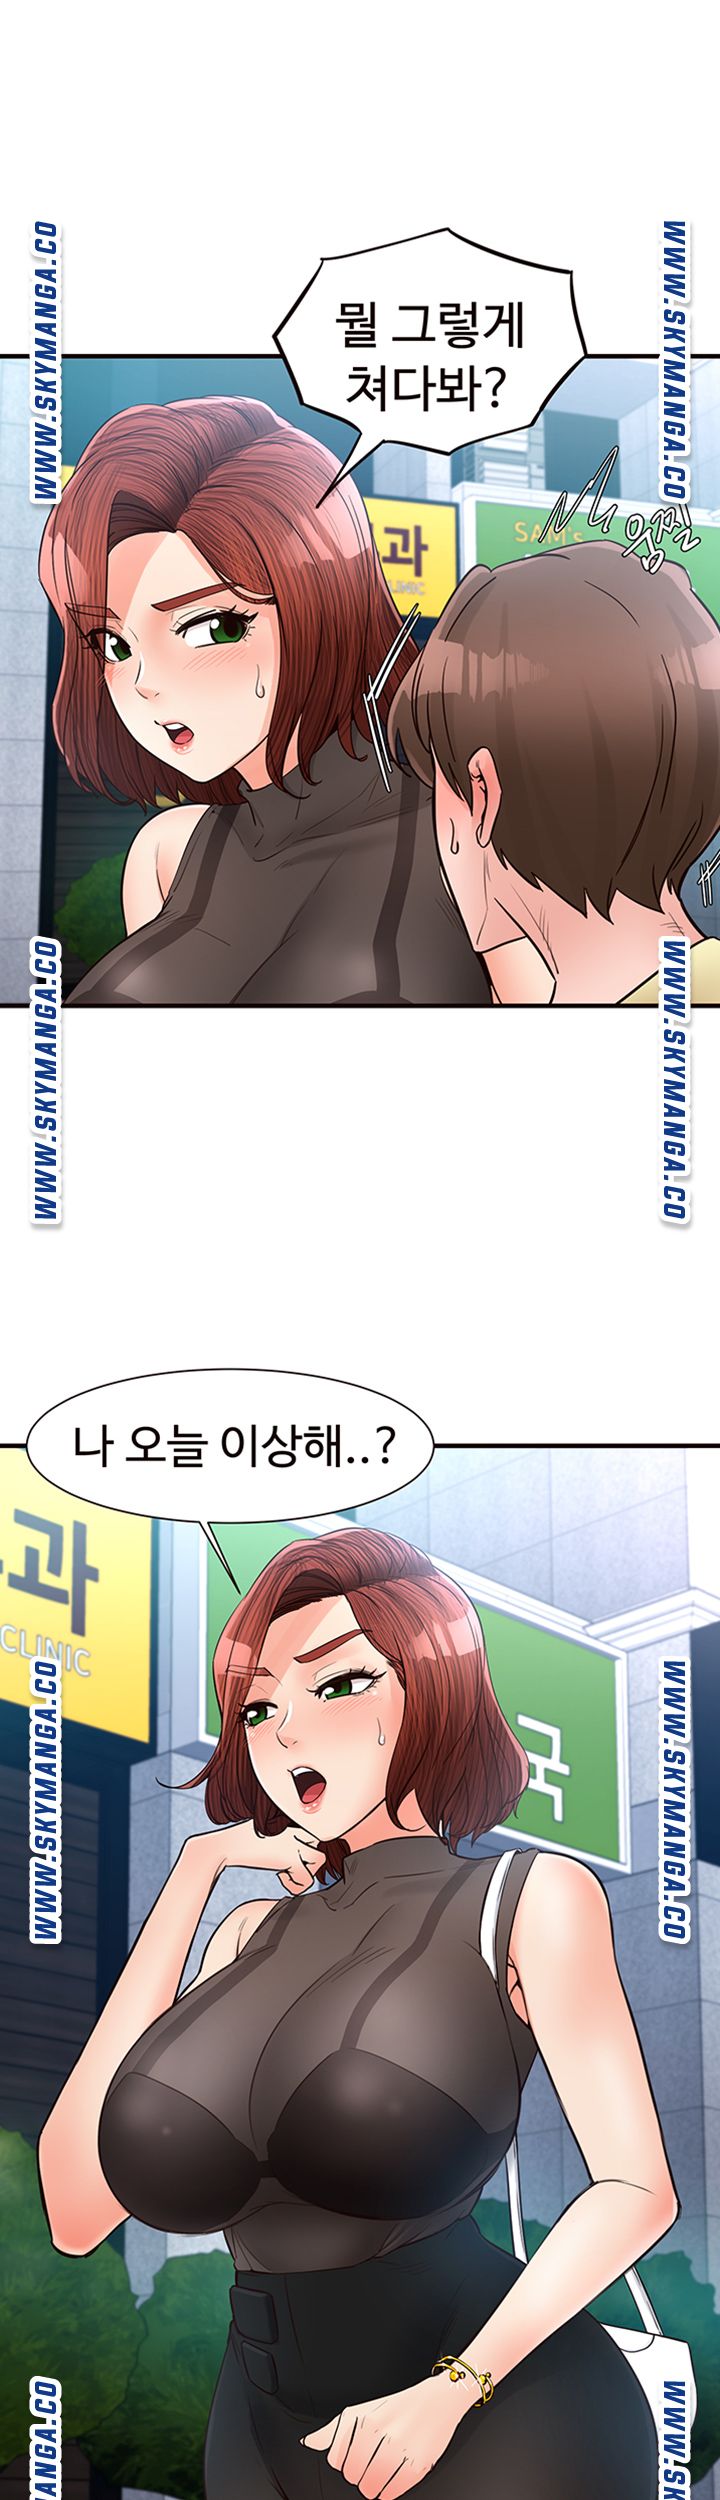 Public Interest Raw - Chapter 20 Page 10